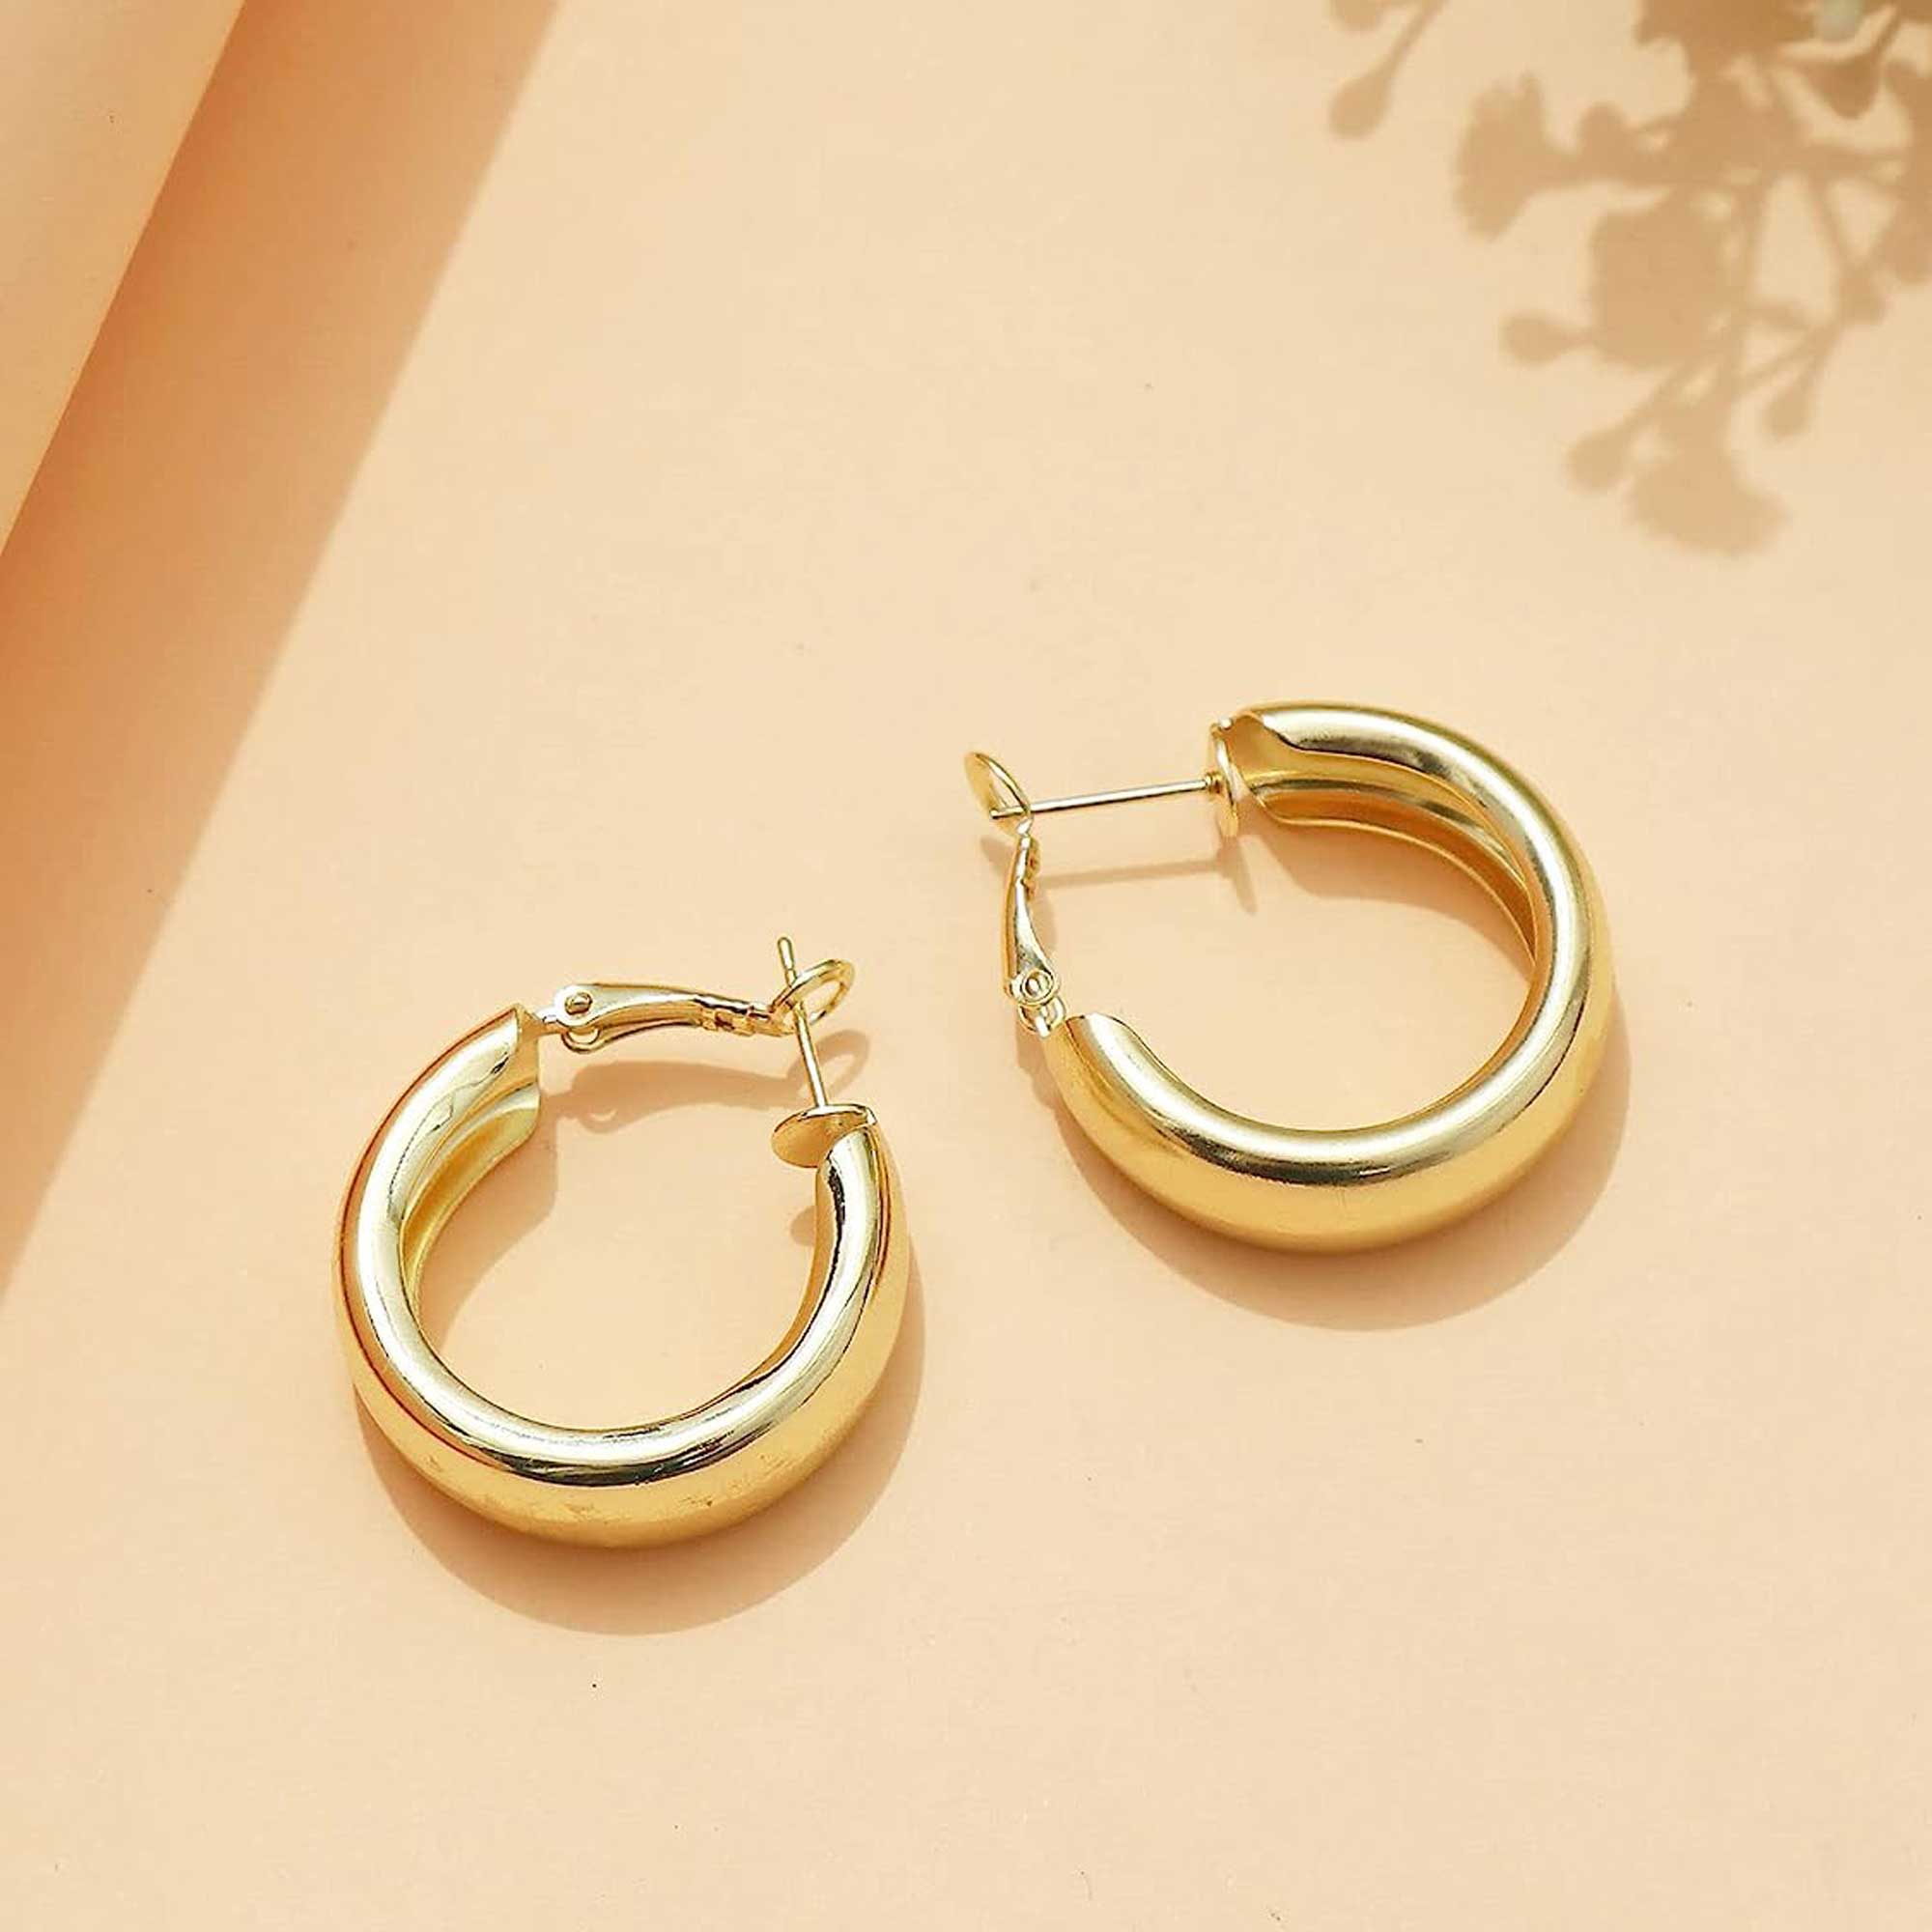 Cute Double Pearls Drop Small Hoop Earrings Jewelry Gifts for Girls